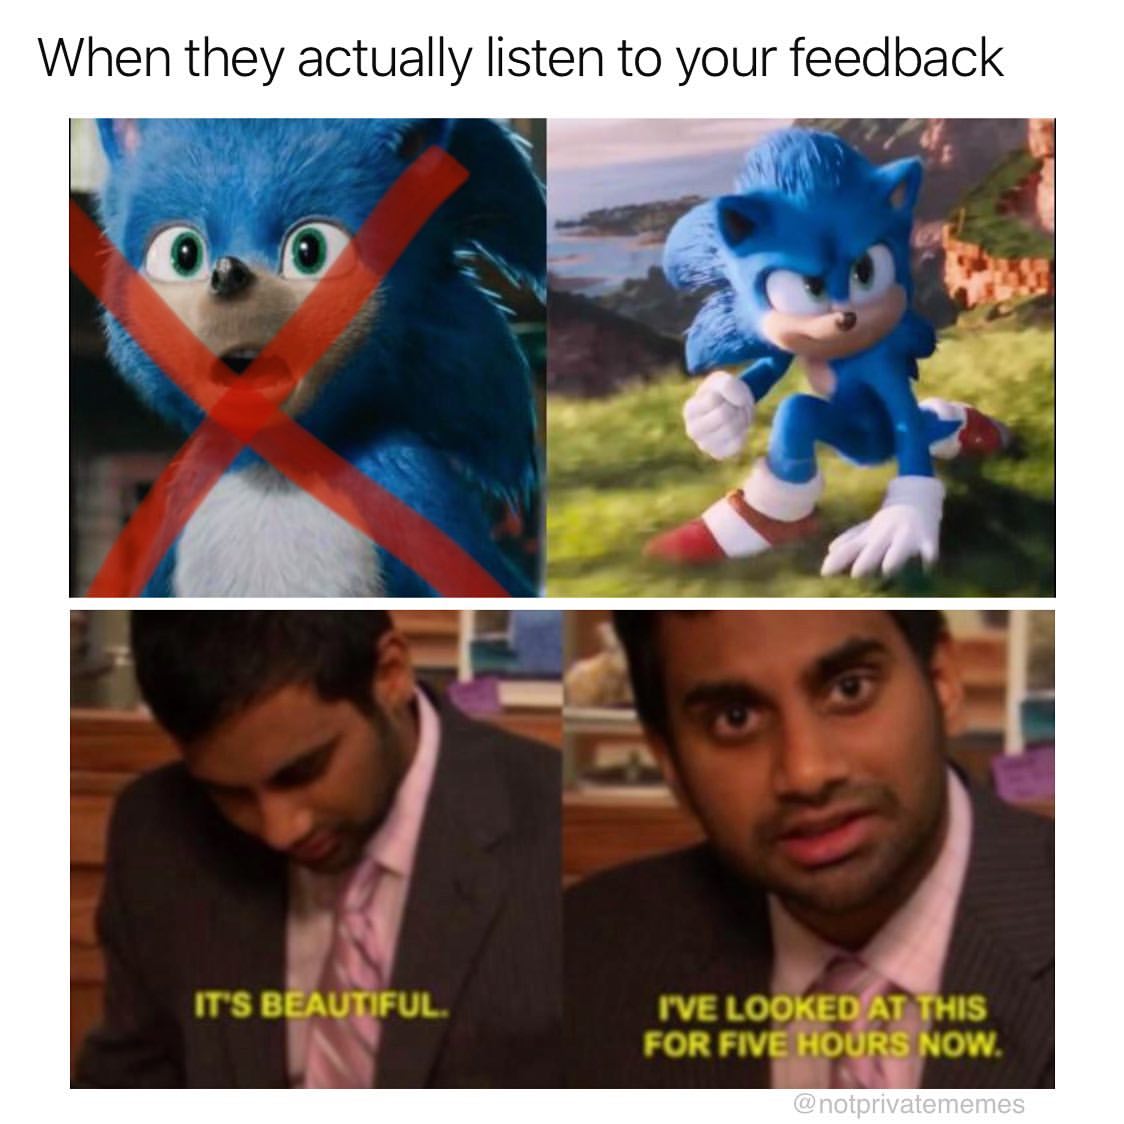 When they actually listen to your feedback.  It's beautiful. I've looked at this for five hours now.